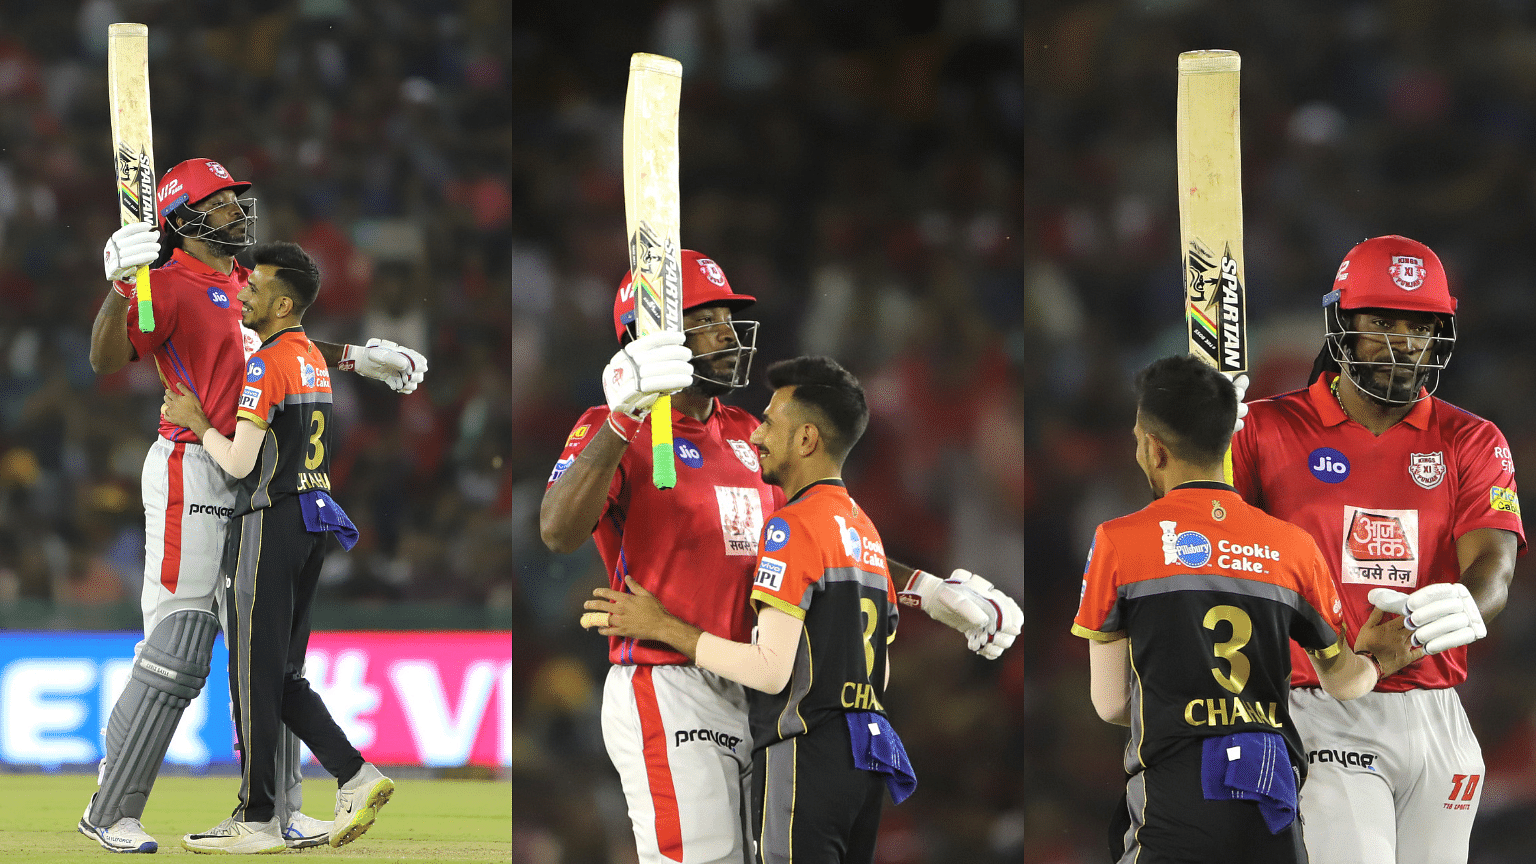 Chris Gayle and Yuzvendra Chahal during the IPL 2019 match at Chandigarh.